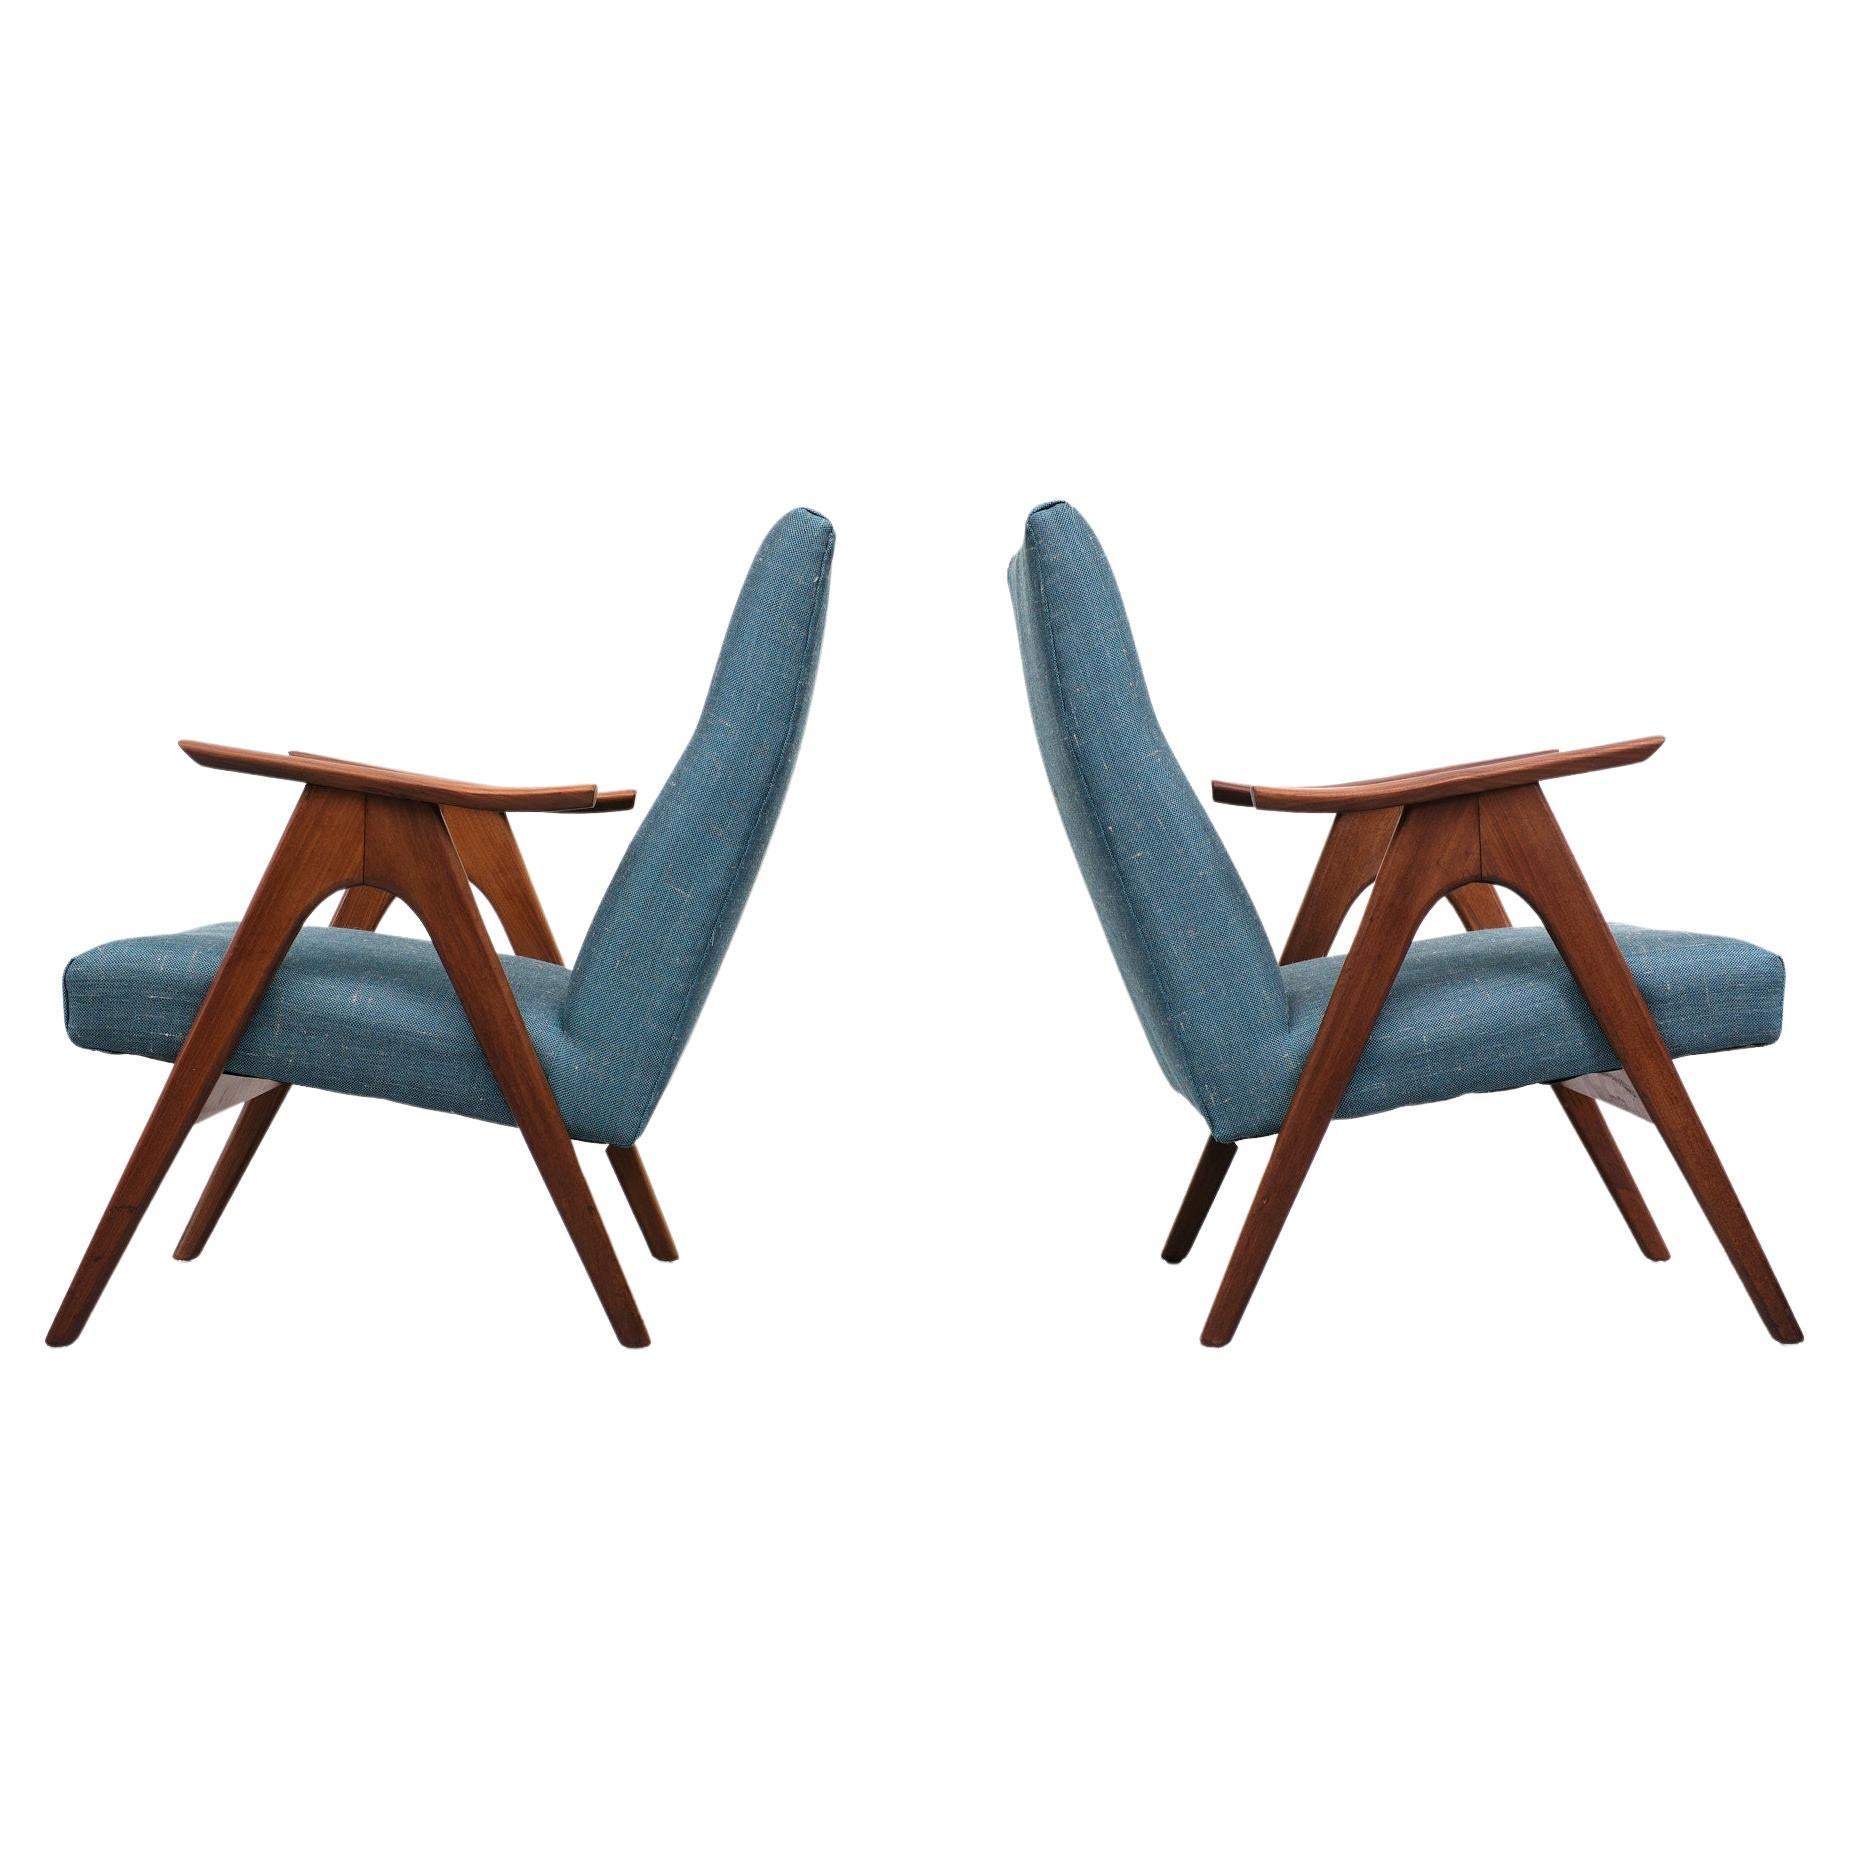 Two Beautiful easy chairs. Solid Teak frame, comes with a brand new upholstery. 
in a mixed Blue color. Very good quality fabric, Design Louis van Teeffelen for Wëbë 
Holland 1960s Very nice organic curved Armrests. Good seating comfort.